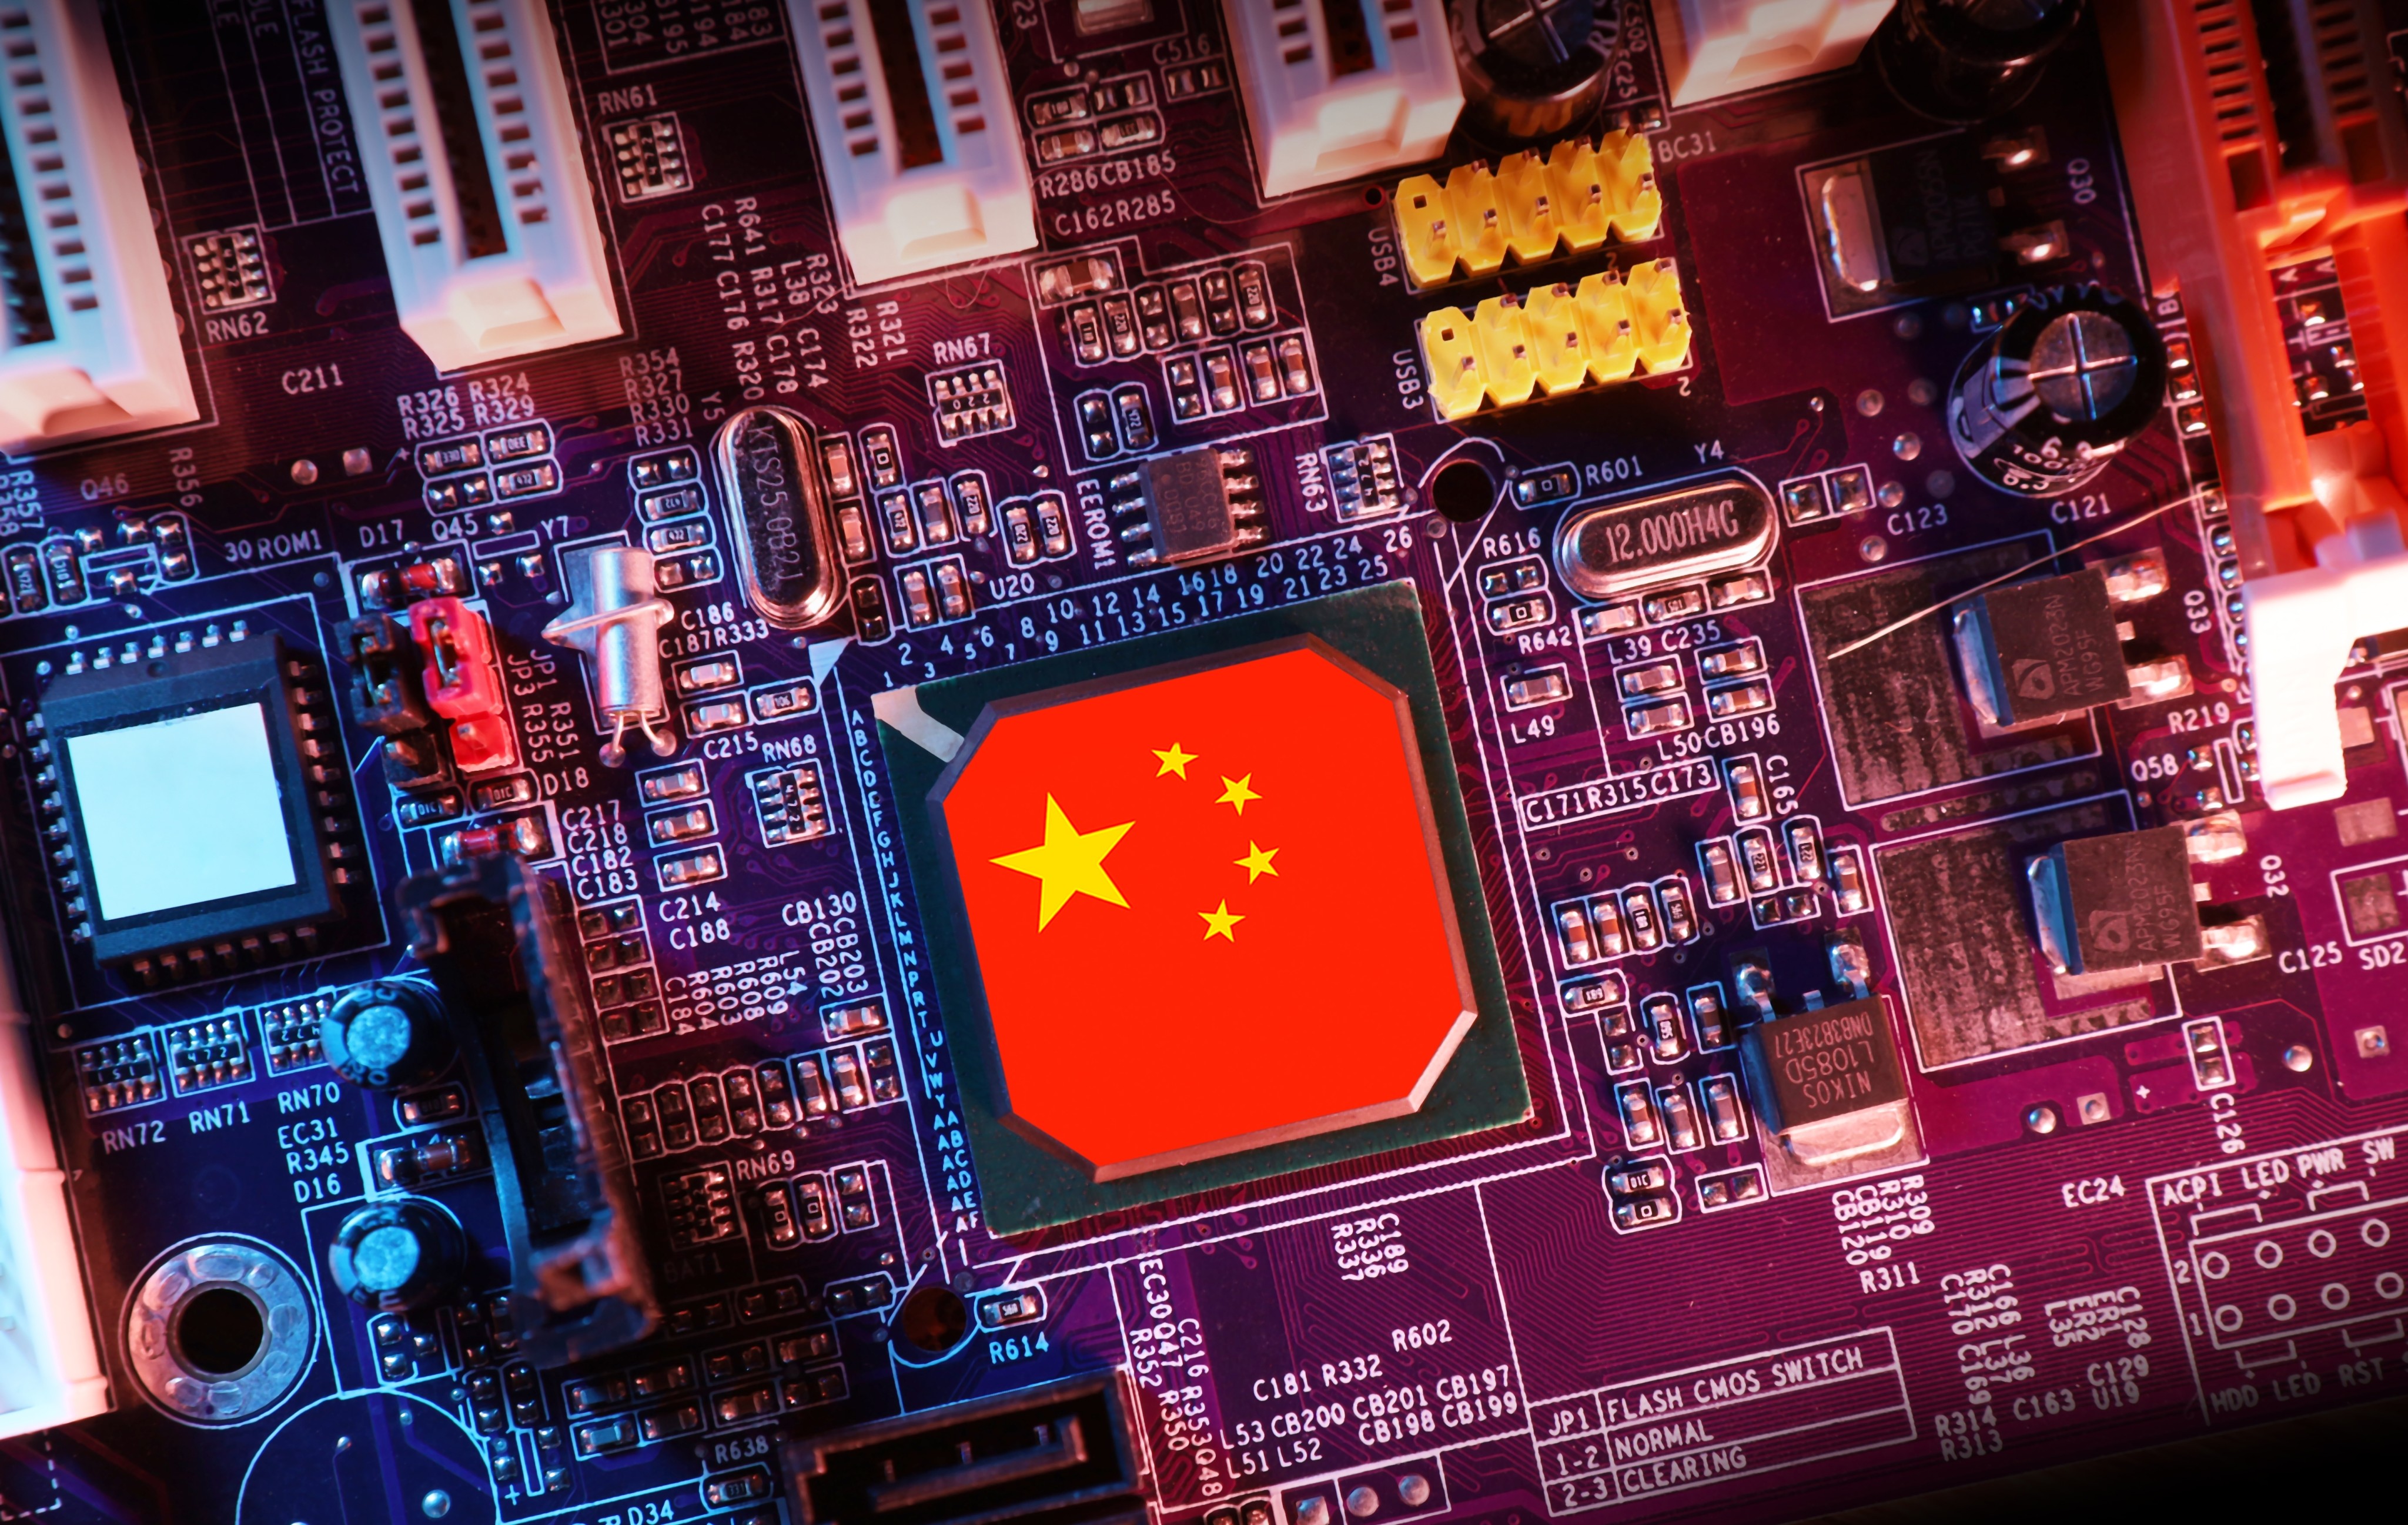 The downward trend in trade data comes amid increasing efforts by the US to restrict China’s access to advanced chips and chip-making equipment. Photo: Shutterstock Images